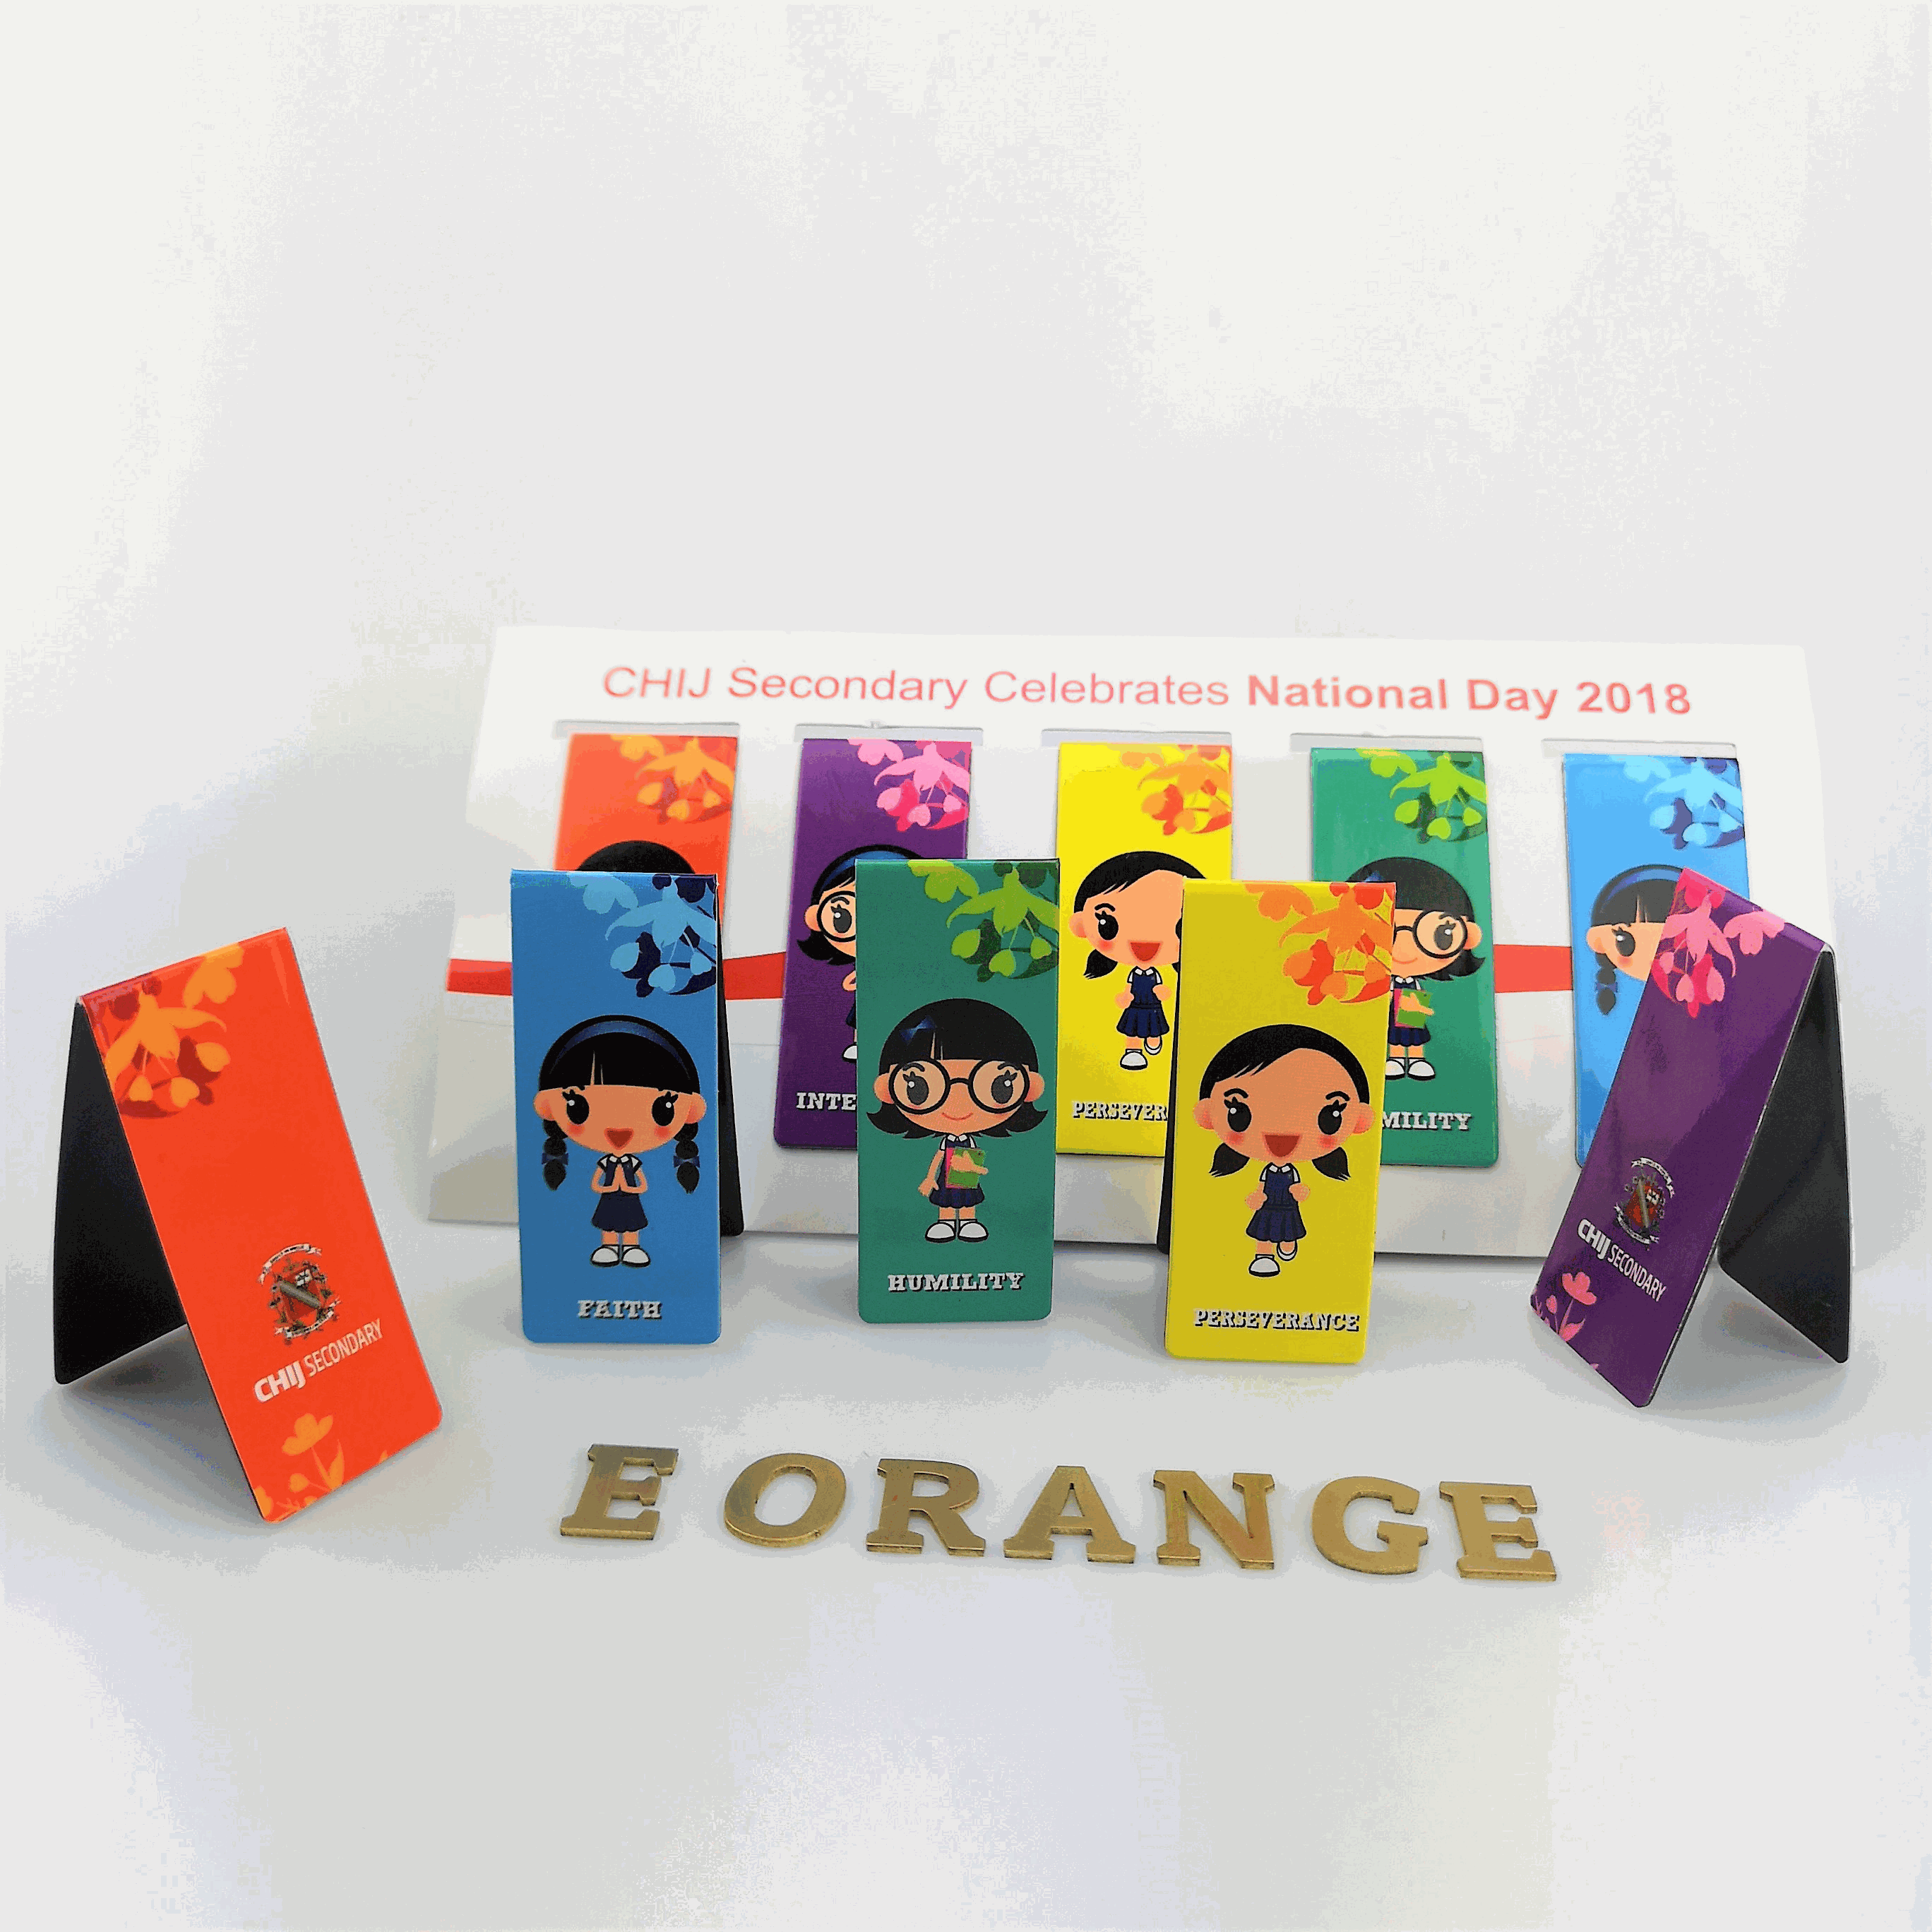 customised customized Magnet Bookmarks Sets printing logo full color colour corporate gift promotional gift giveaway door wholesale singapore supplier 